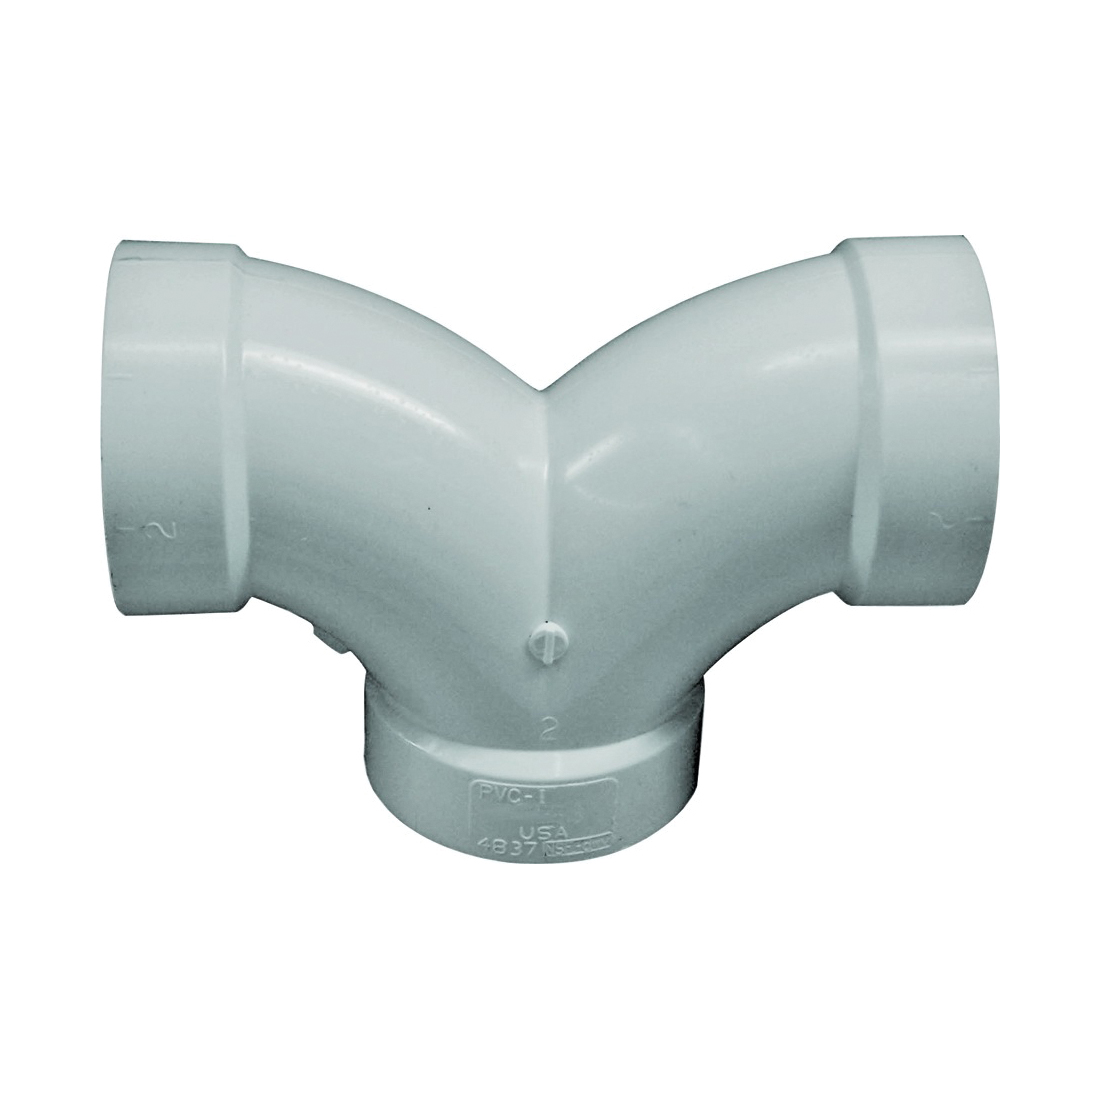 700 Series 70726 Double Pipe Elbow, 2 in, Hub, 90 deg Angle, PVC, SCH 40 Schedule